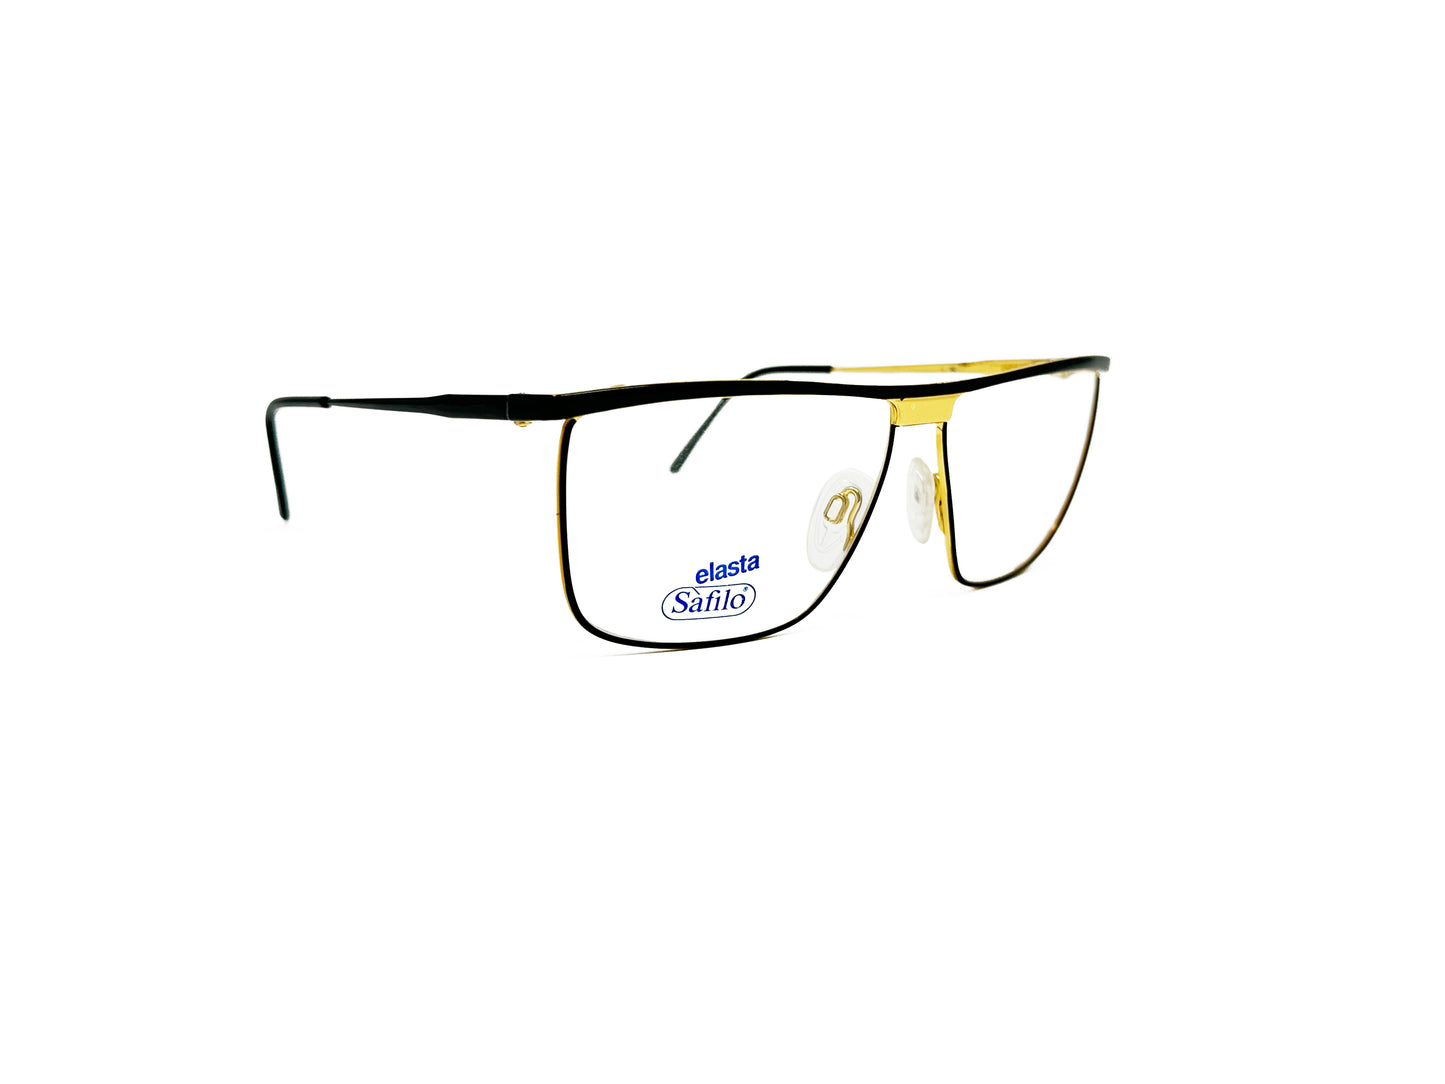 Safilo flattop wire optical frames with gold piece at the top of the nose bridge. Model: Flattop. Color: 70C - Black with gold on bridge. Side view.